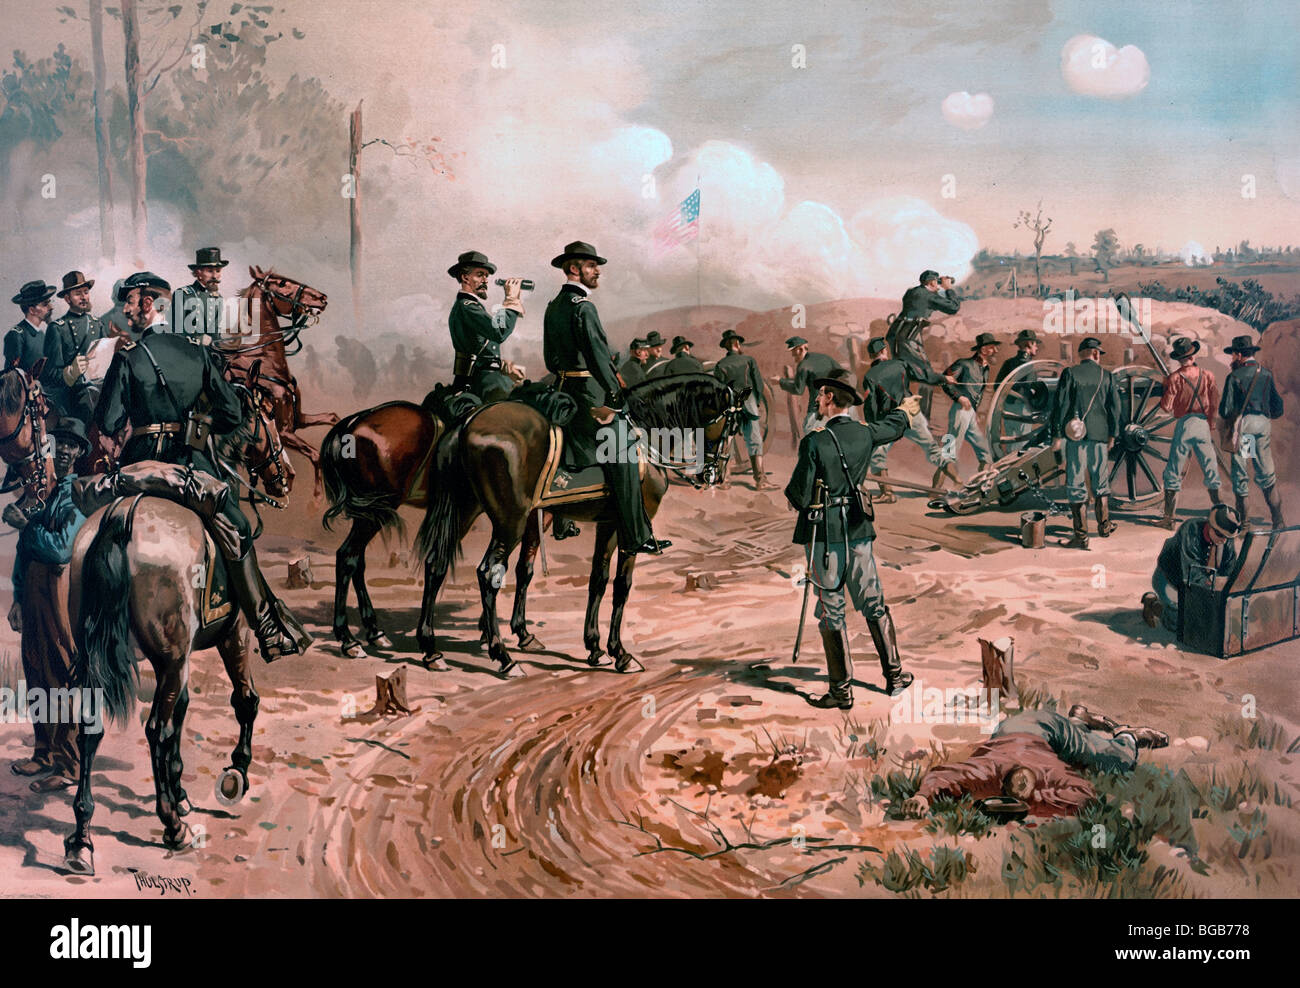 Union soldiers on horseback, other soldiers at cannon at the Battle of Atlanta, 1864 during USA Civil War Stock Photo